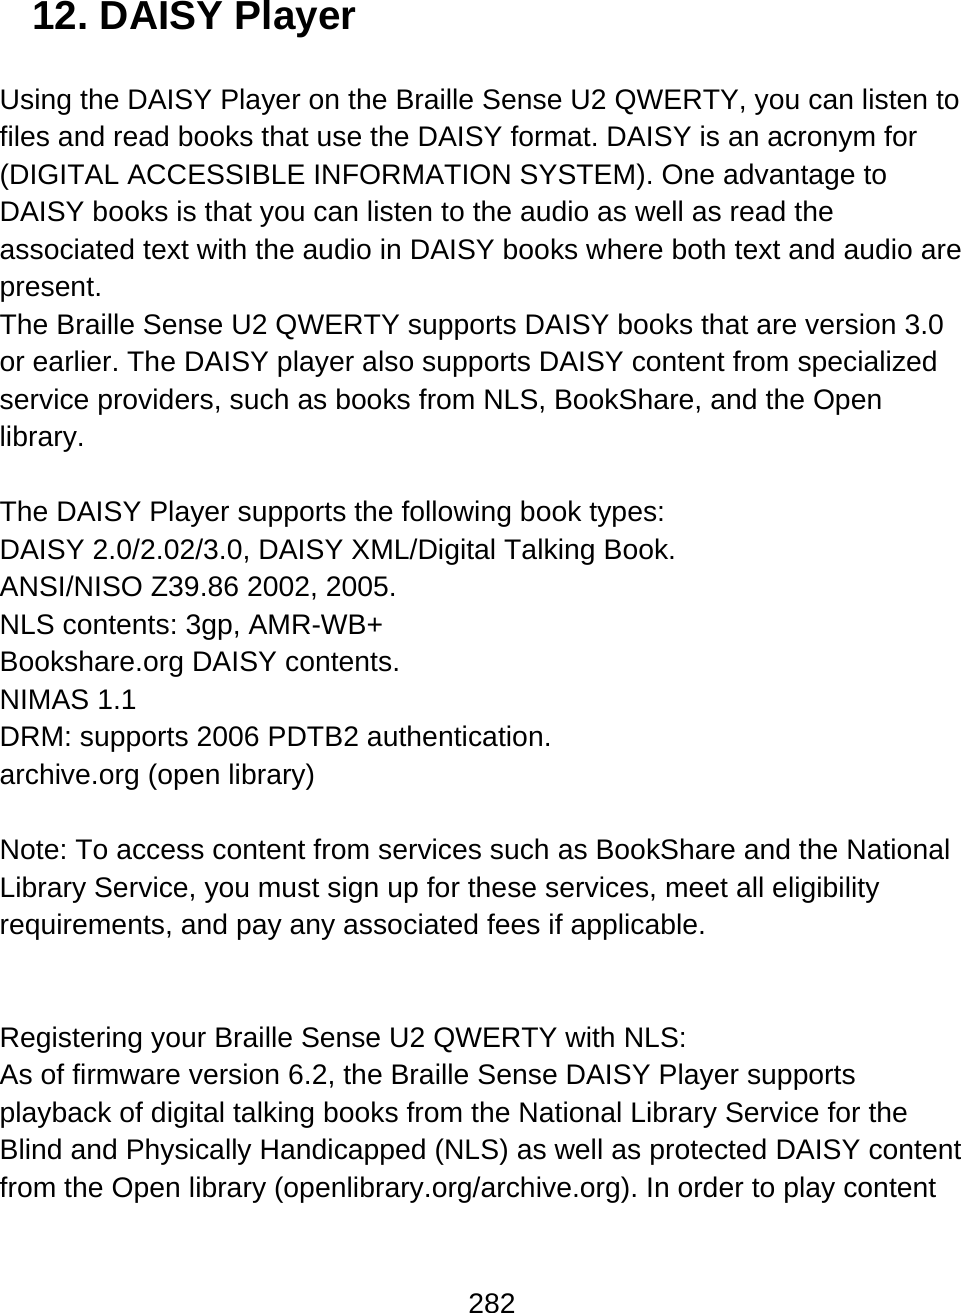 282  12. DAISY Player  Using the DAISY Player on the Braille Sense U2 QWERTY, you can listen to files and read books that use the DAISY format. DAISY is an acronym for (DIGITAL ACCESSIBLE INFORMATION SYSTEM). One advantage to DAISY books is that you can listen to the audio as well as read the associated text with the audio in DAISY books where both text and audio are present.  The Braille Sense U2 QWERTY supports DAISY books that are version 3.0 or earlier. The DAISY player also supports DAISY content from specialized service providers, such as books from NLS, BookShare, and the Open library.  The DAISY Player supports the following book types: DAISY 2.0/2.02/3.0, DAISY XML/Digital Talking Book. ANSI/NISO Z39.86 2002, 2005. NLS contents: 3gp, AMR-WB+ Bookshare.org DAISY contents. NIMAS 1.1  DRM: supports 2006 PDTB2 authentication.  archive.org (open library)  Note: To access content from services such as BookShare and the National Library Service, you must sign up for these services, meet all eligibility requirements, and pay any associated fees if applicable.   Registering your Braille Sense U2 QWERTY with NLS: As of firmware version 6.2, the Braille Sense DAISY Player supports playback of digital talking books from the National Library Service for the Blind and Physically Handicapped (NLS) as well as protected DAISY content from the Open library (openlibrary.org/archive.org). In order to play content 